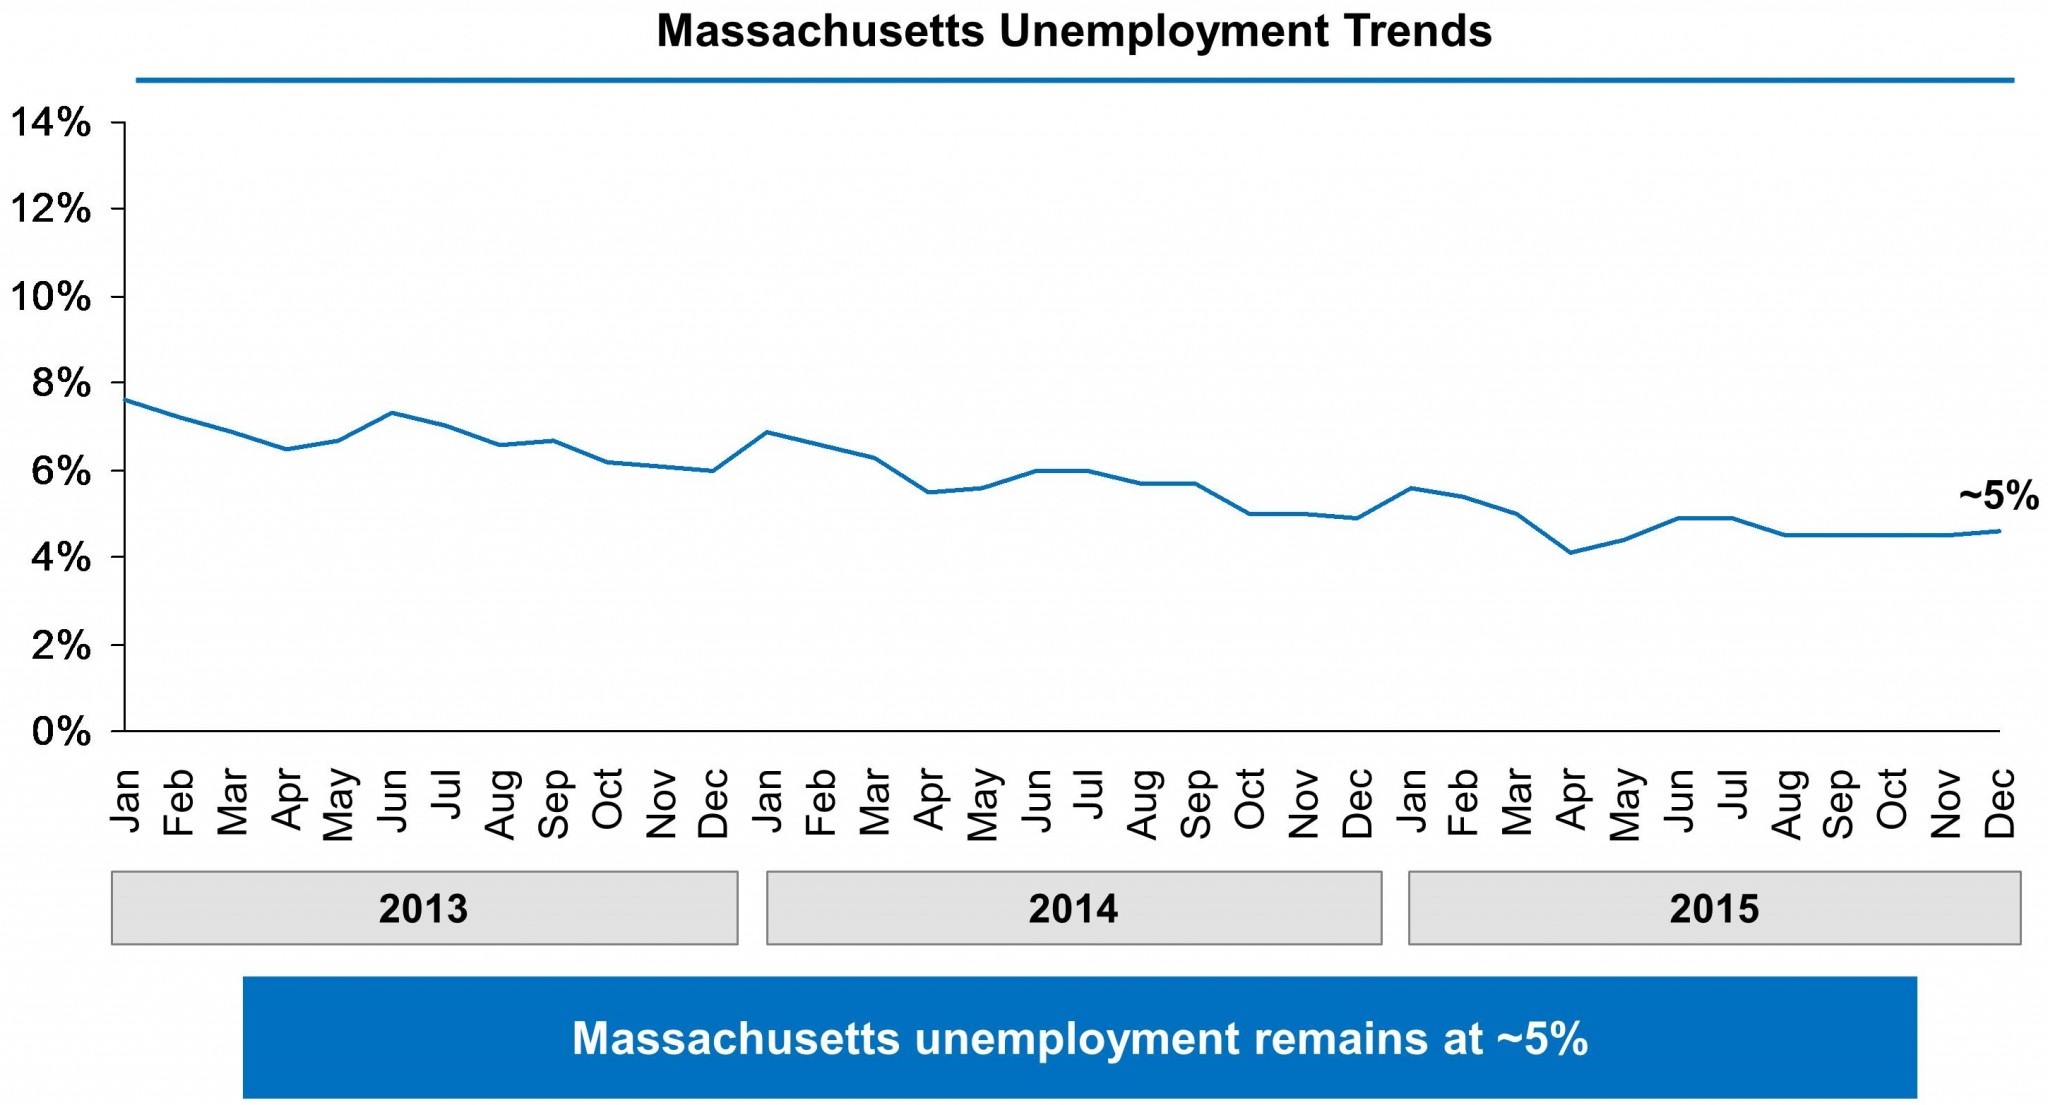 Chart showing Massachusetts' unemployment rate falling from 8% in January 2013 to approximately 5% in December 2015.